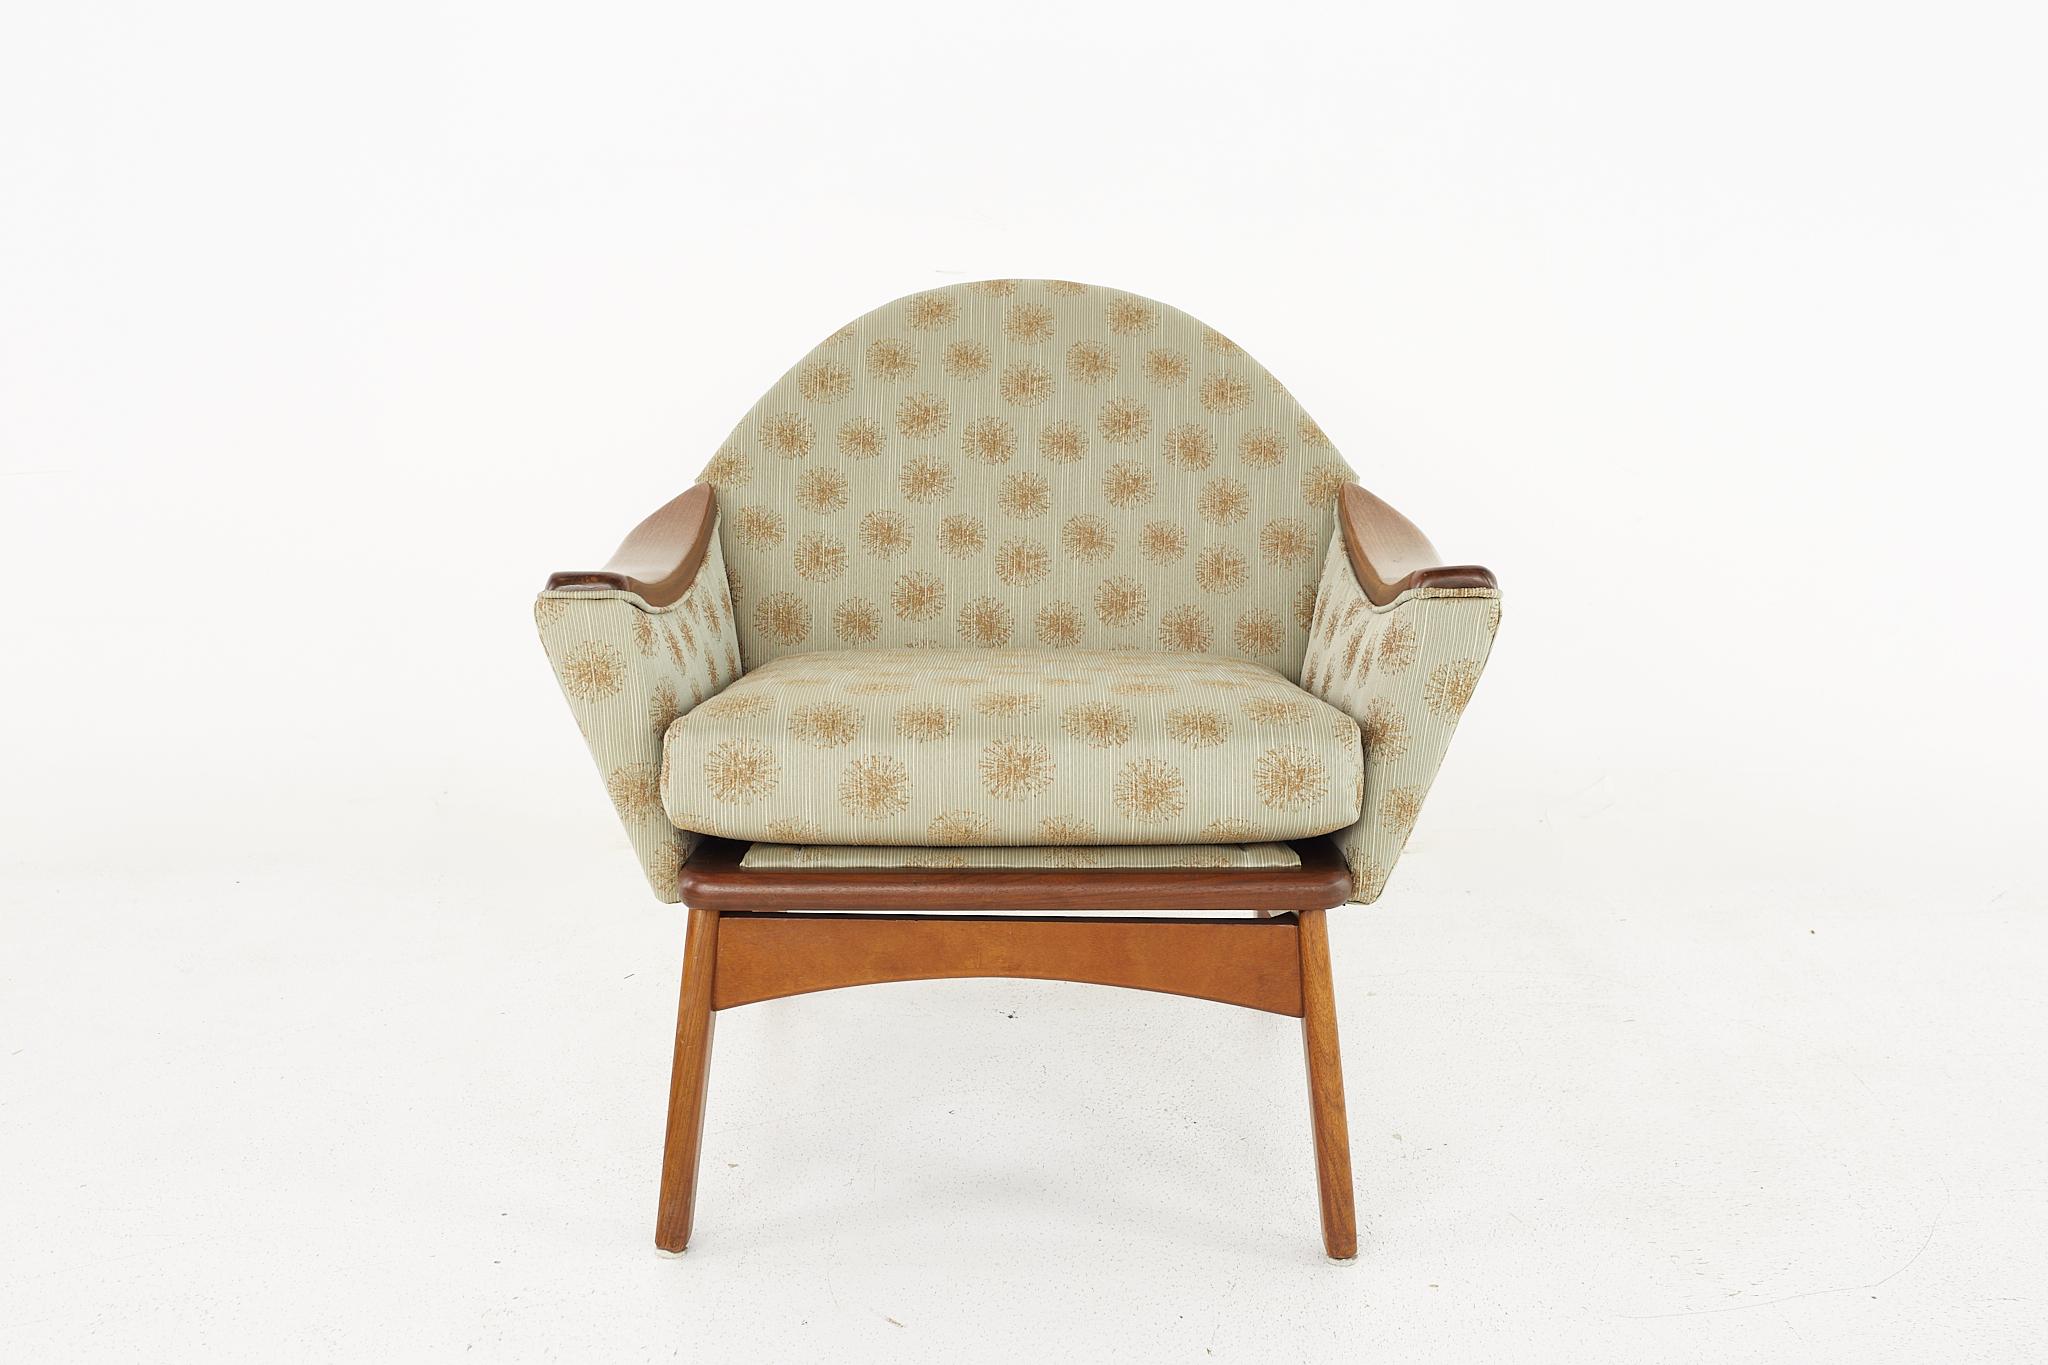 Adrian Pearsall for Craft Associates Mid Century Highback Lounge Chair

This lounge chair measures: 29.75 wide x 20 deep x 37 high, with a seat height of 16 and arm height/chair clearance 20 inches

All pieces of furniture can be had in what we call